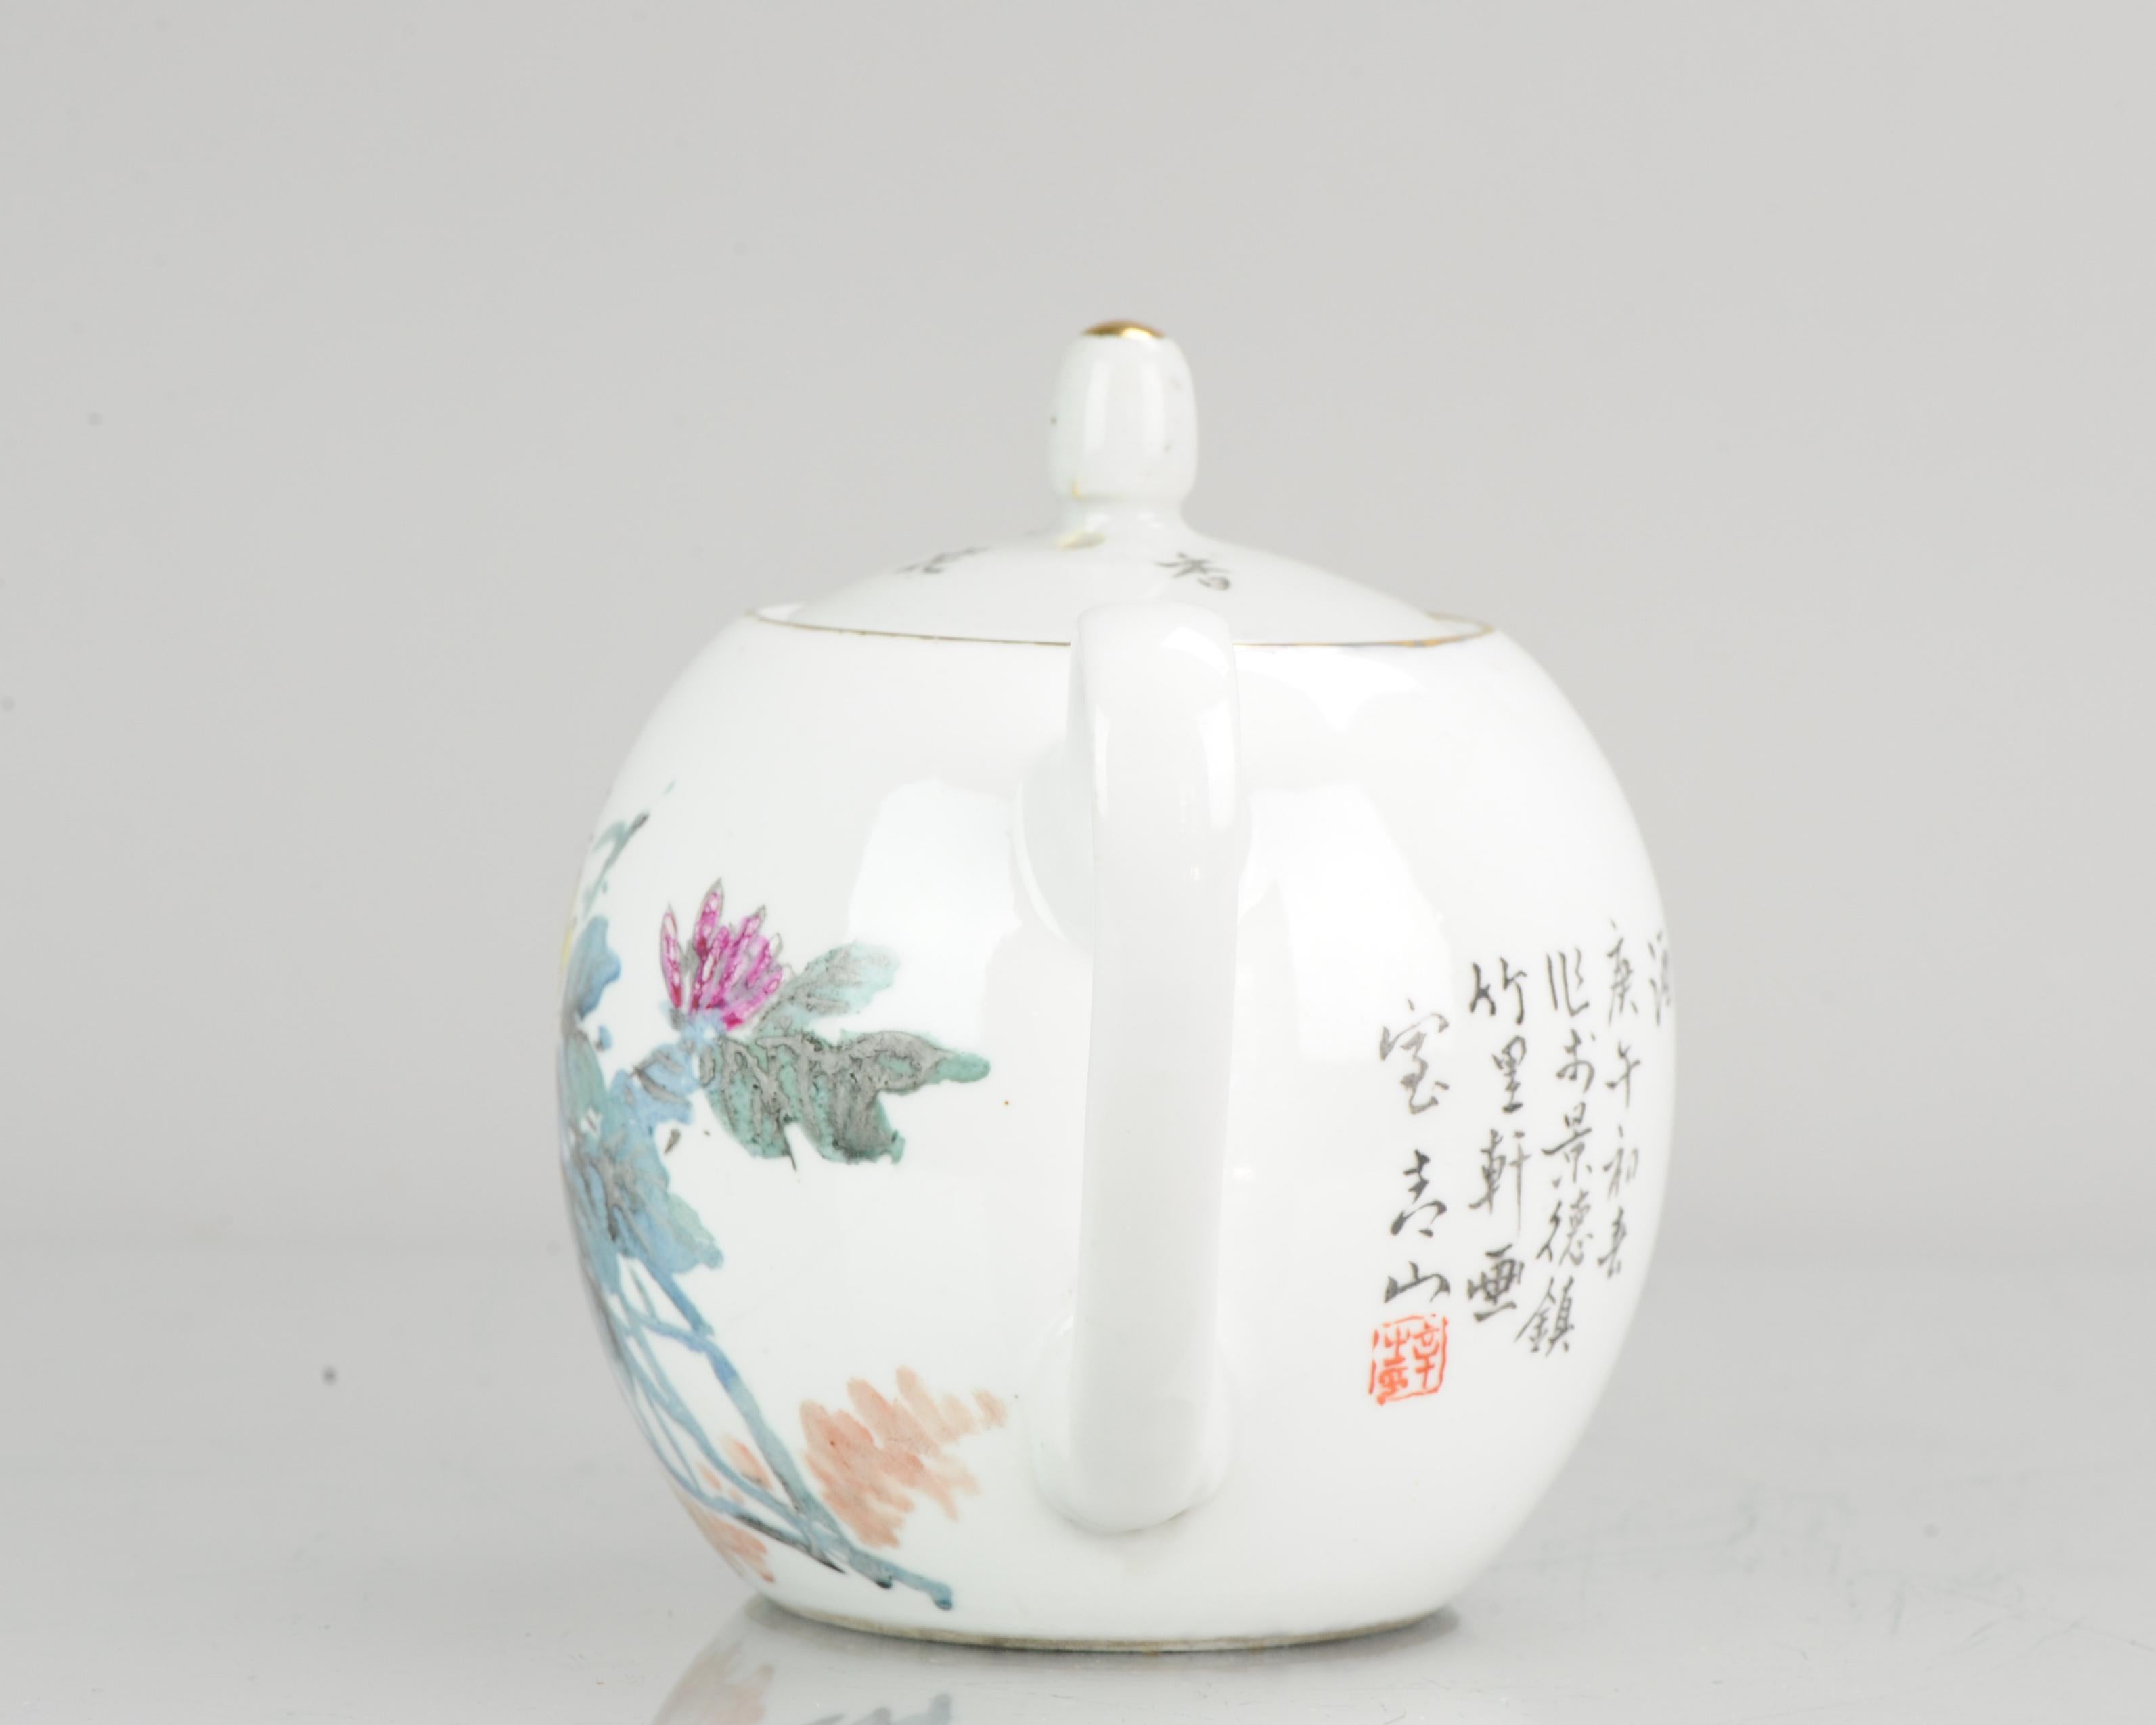 A very nicely made teapot. Late 20th century and of very nice quality. Very original in its artwork and painting

Additional information:
Material: Porcelain & Pottery
Region of Origin: China
Period: 20th century PRoC (1949 - now)
Age: